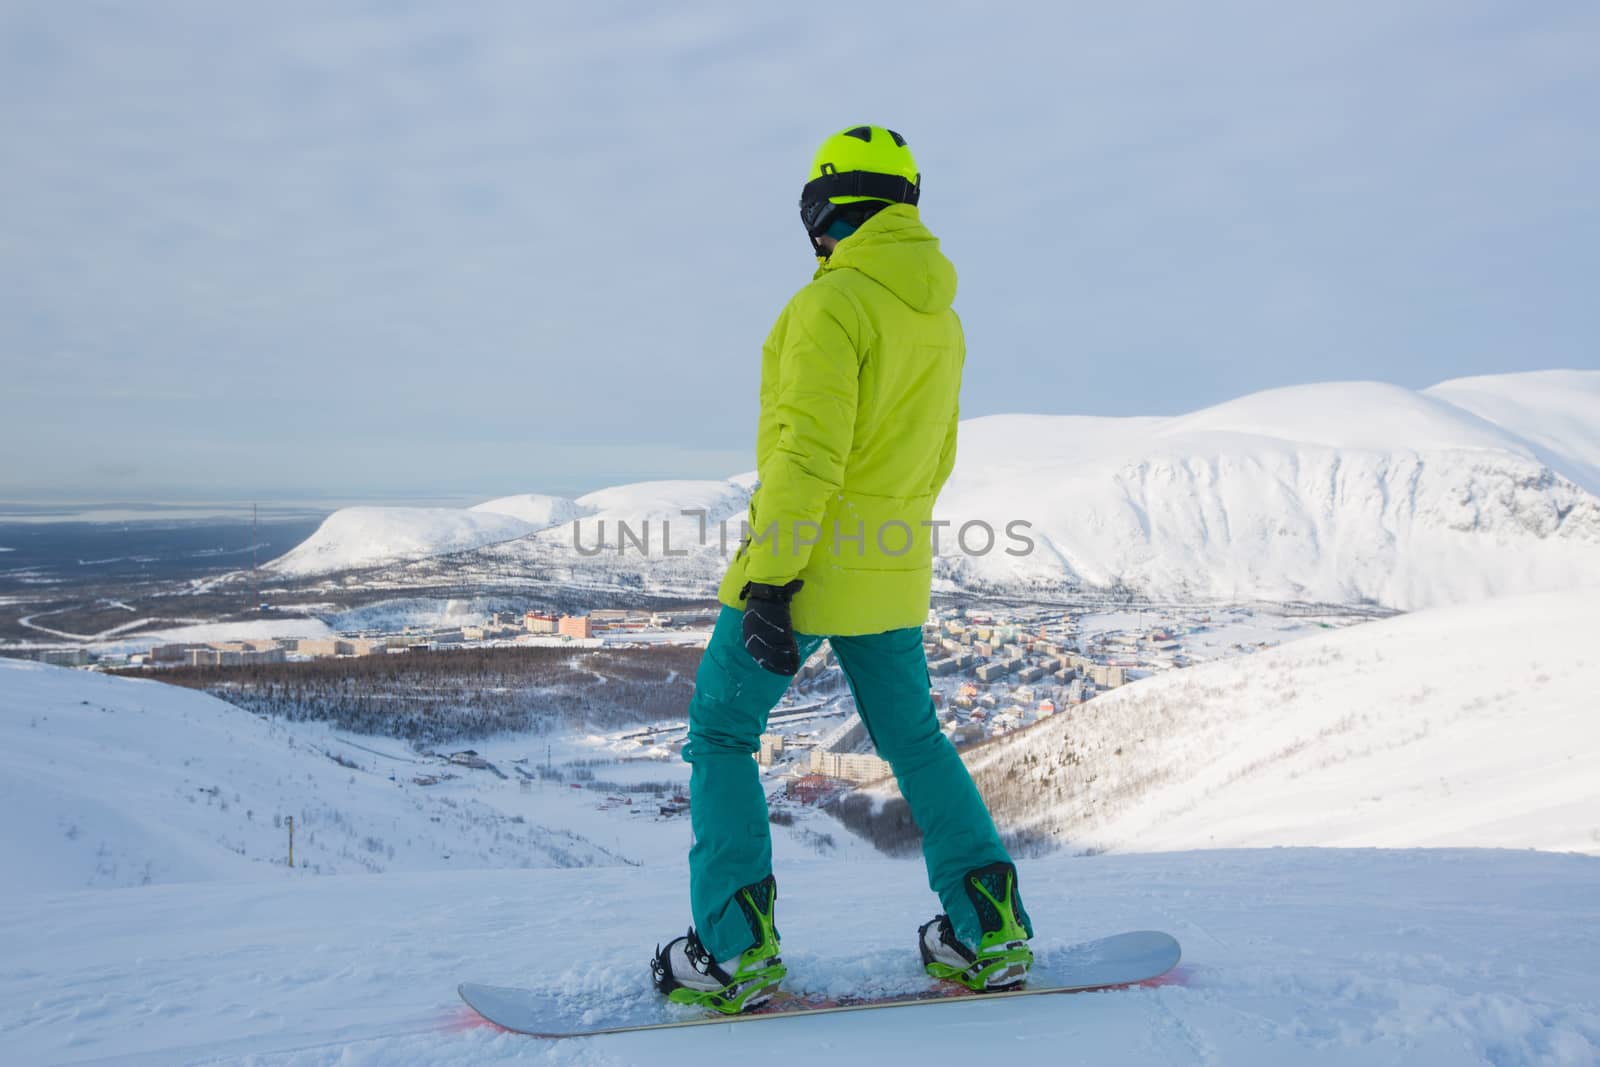 Kirovsk, Russia - Snowboarder on piste in high mountains on ski slope. Rear view. Winter snowboard and skiing concept. Khibiny Mountains, Kola Peninsula panoramic view in town